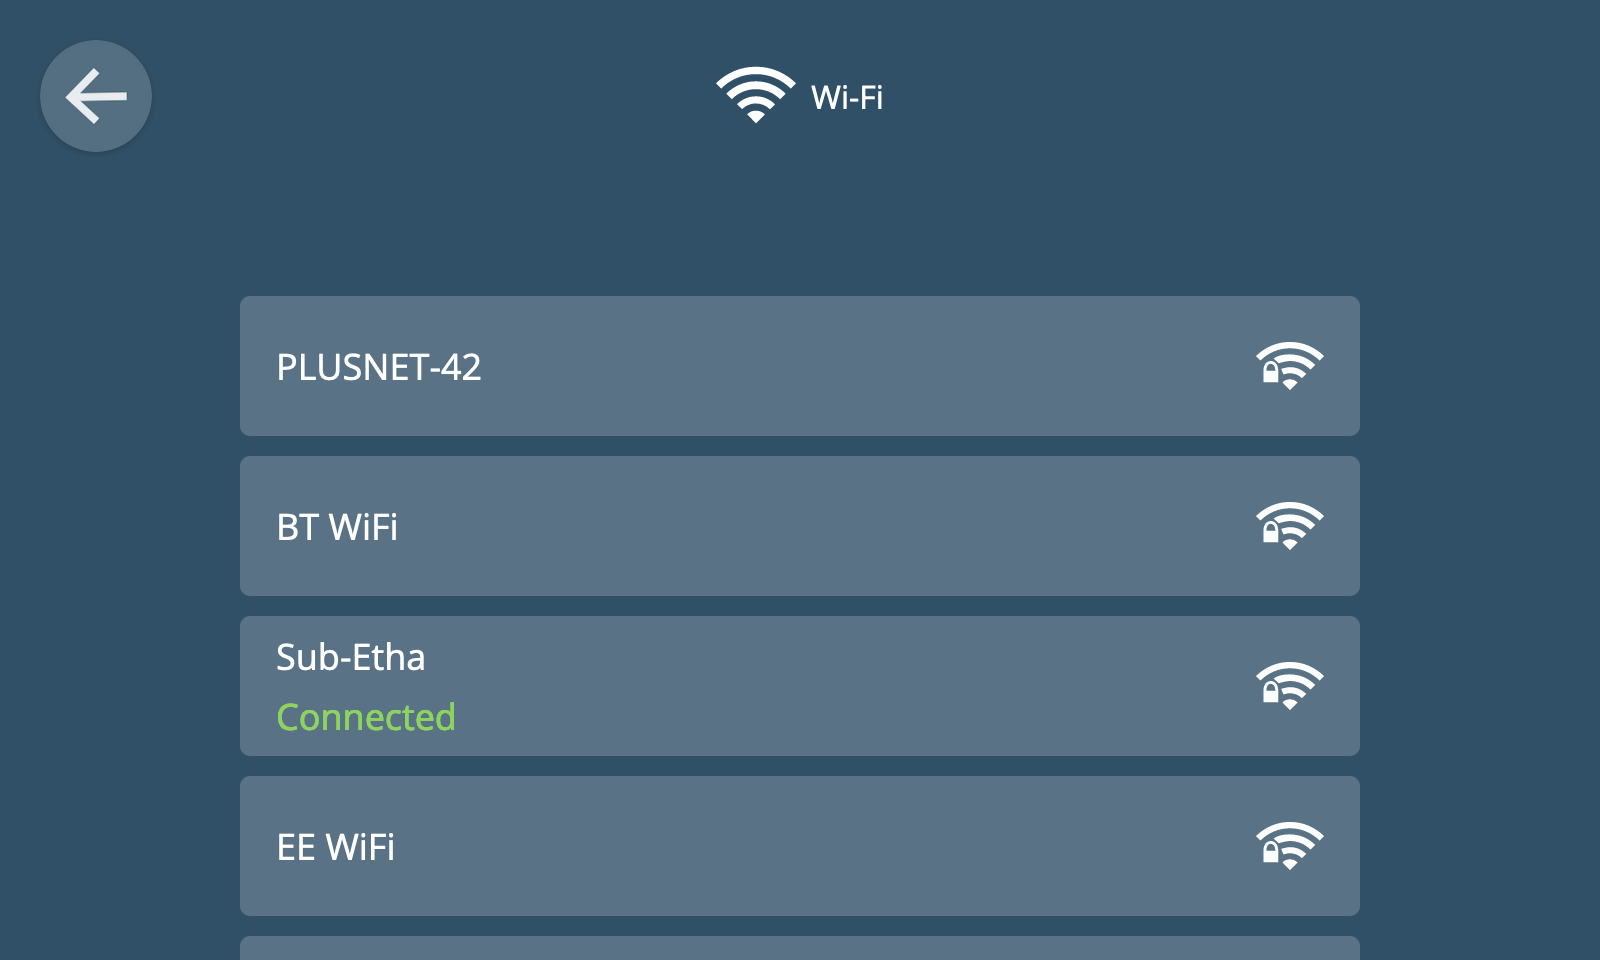 Screenshot of the Wi-Fi settings view, listing nearby Wi-Fi networks